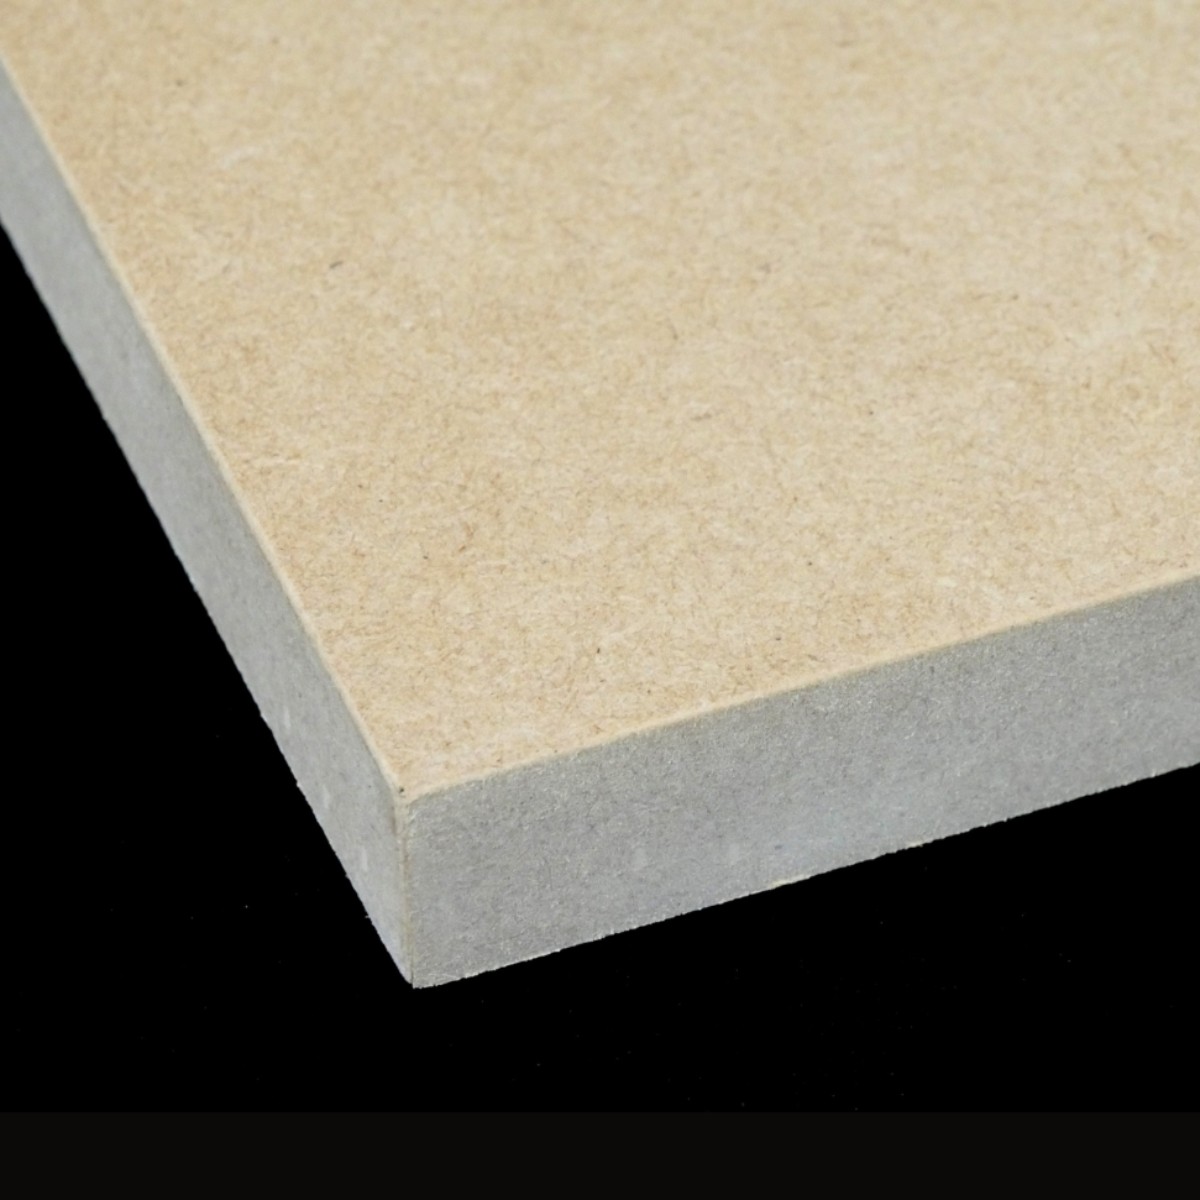 18″x24″ 457x610mm – Sanded